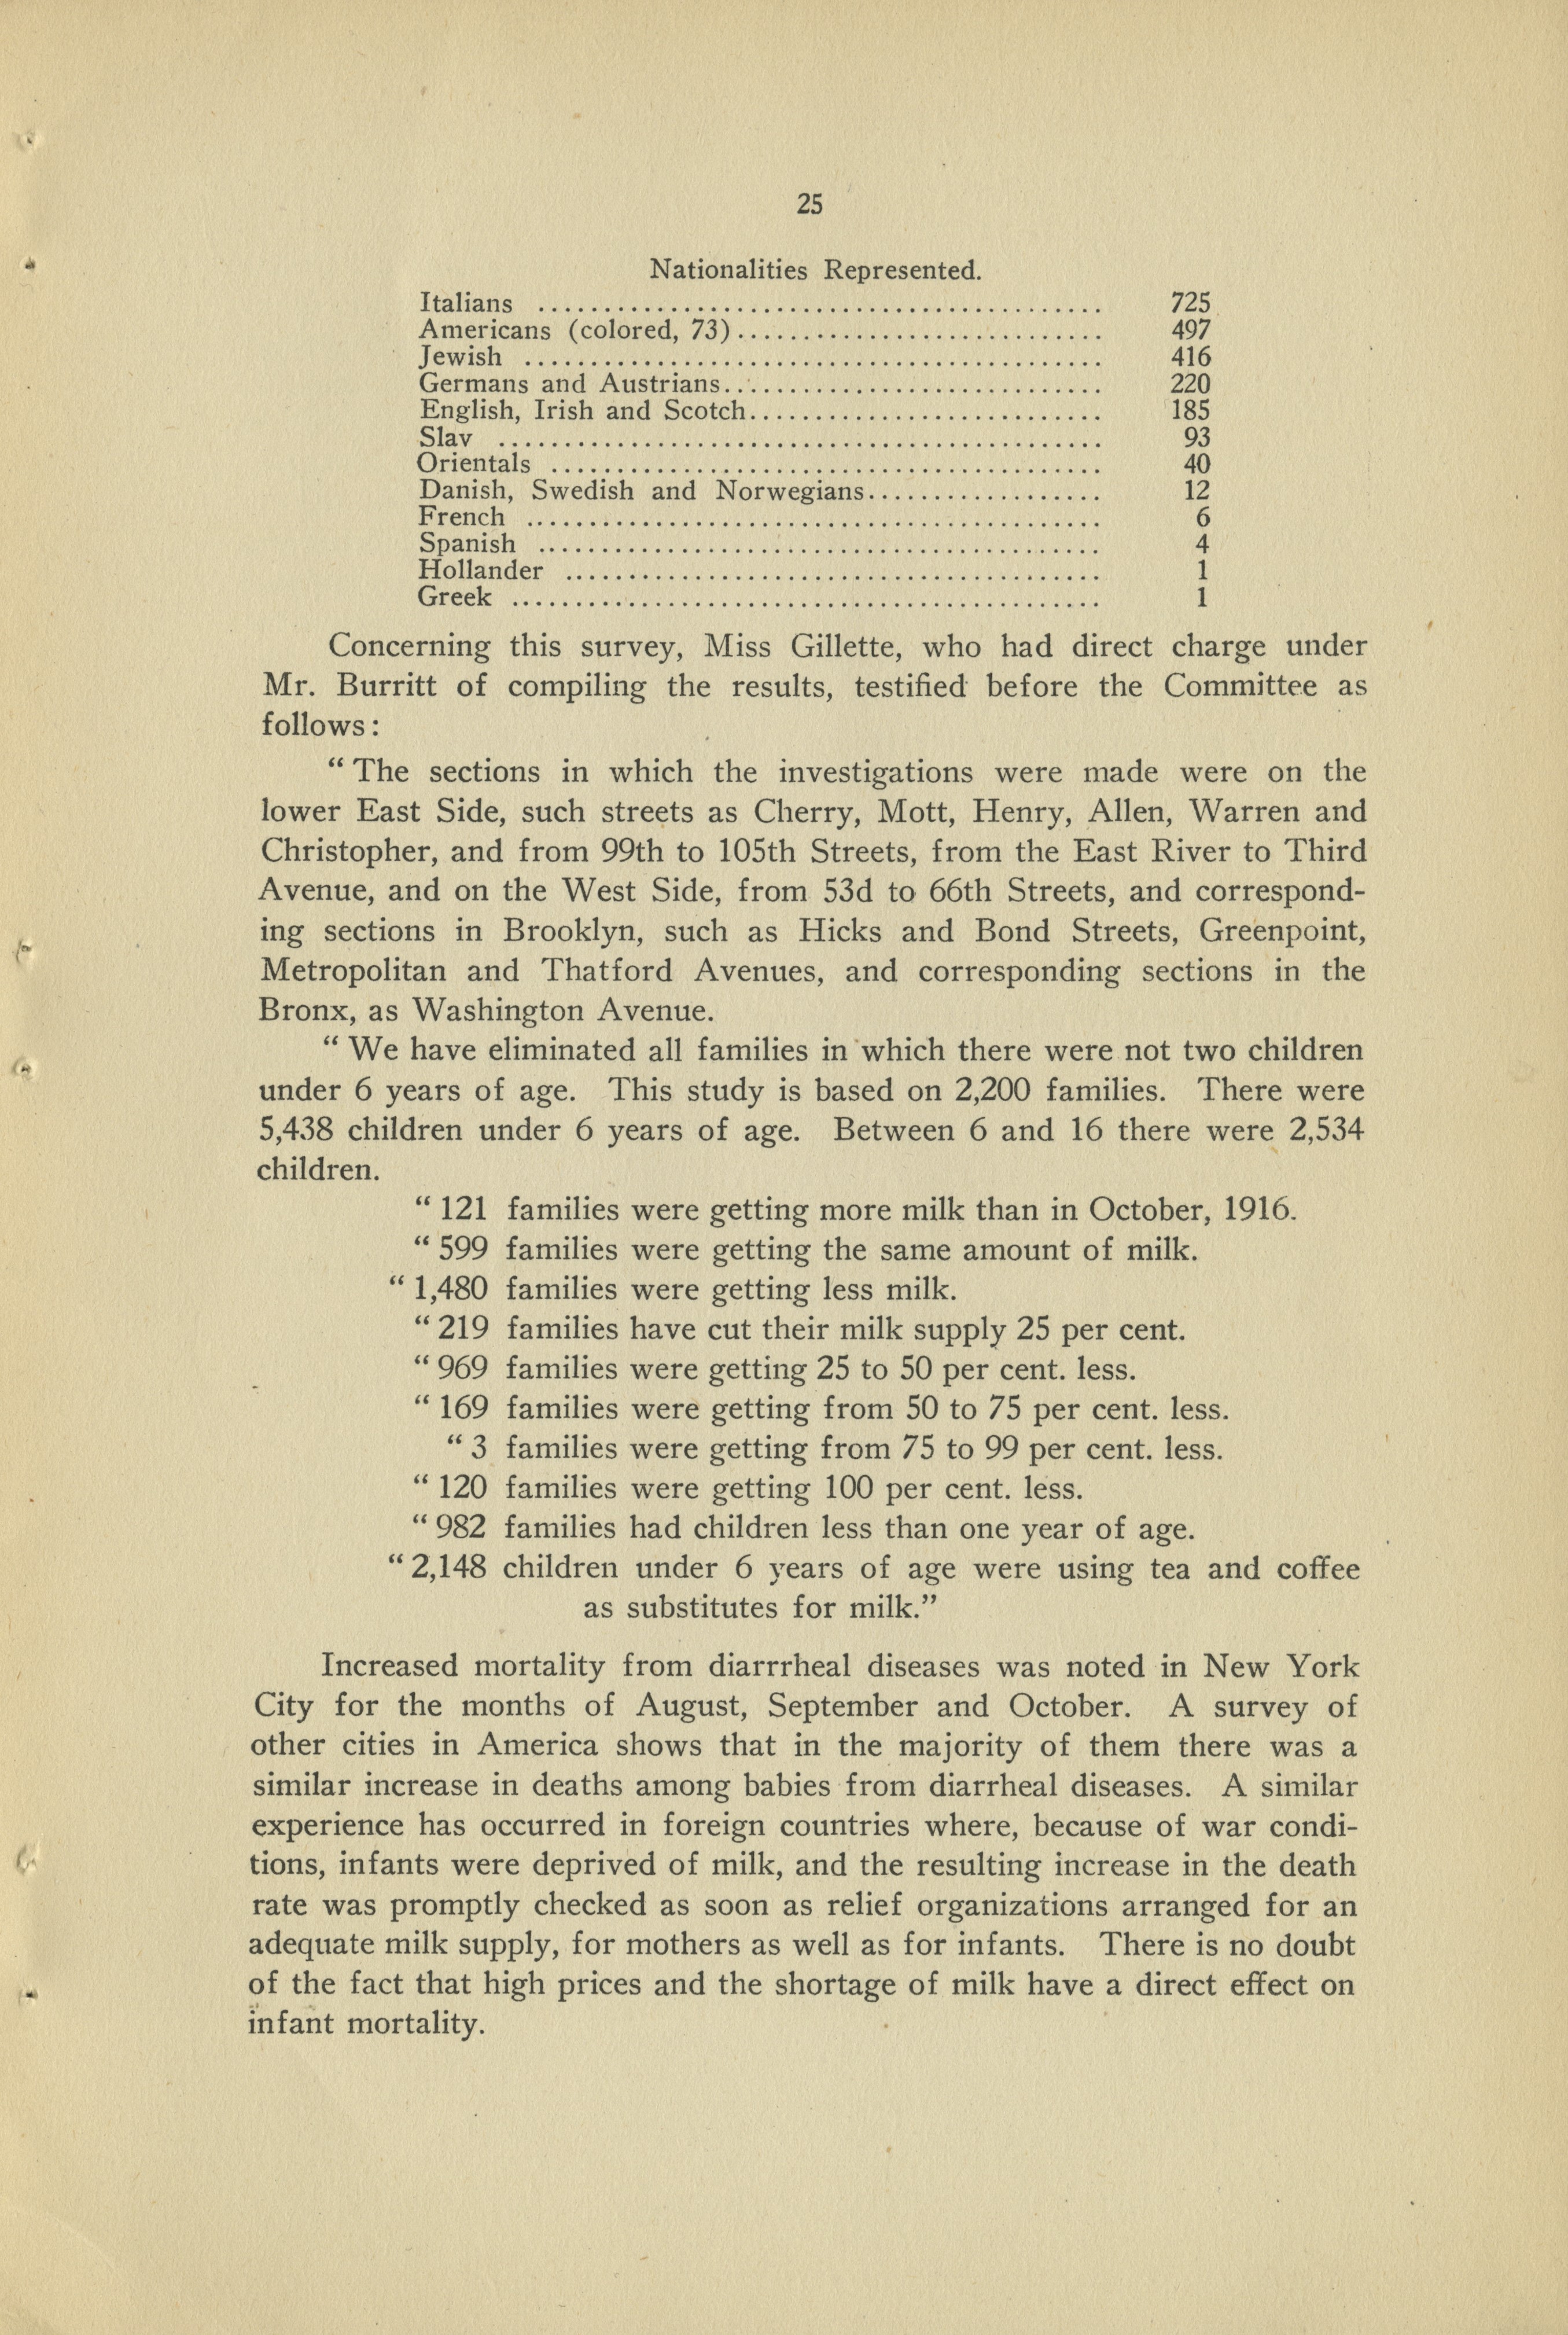 Text describing the results of the 1916-1917 survey sent to 2,200 families.